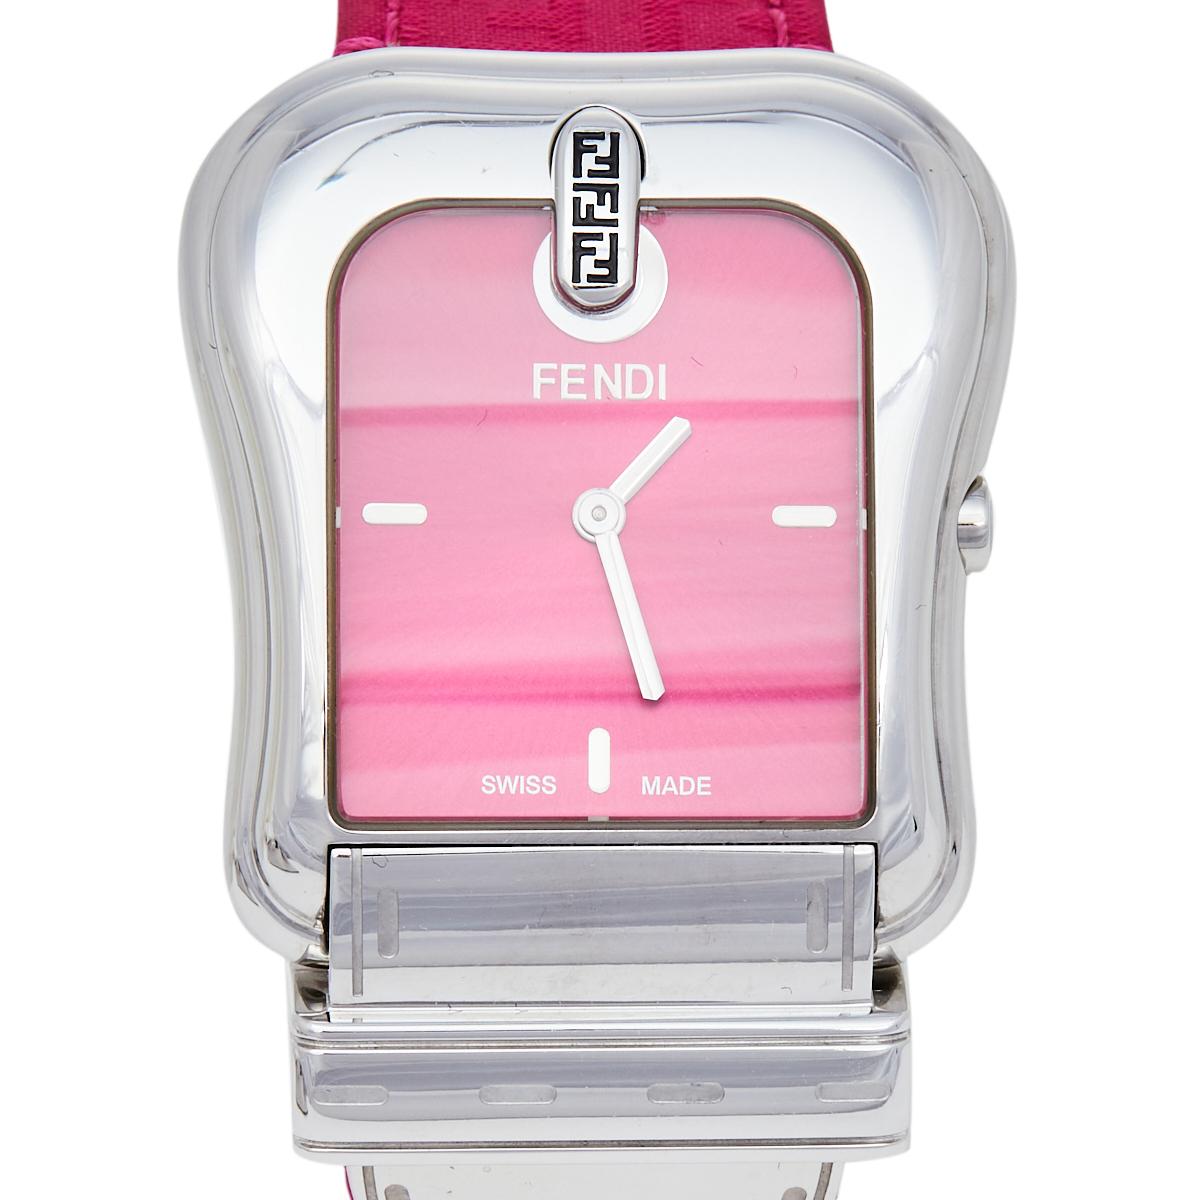 This wristwatch from Fendi is here to remind you that you deserve only the best. Swiss-made and created from stainless steel, this watch flaunts a buckle-like case. The Fendi quartz watch has a pink dial and a branded bracelet with a buckle clasp.

